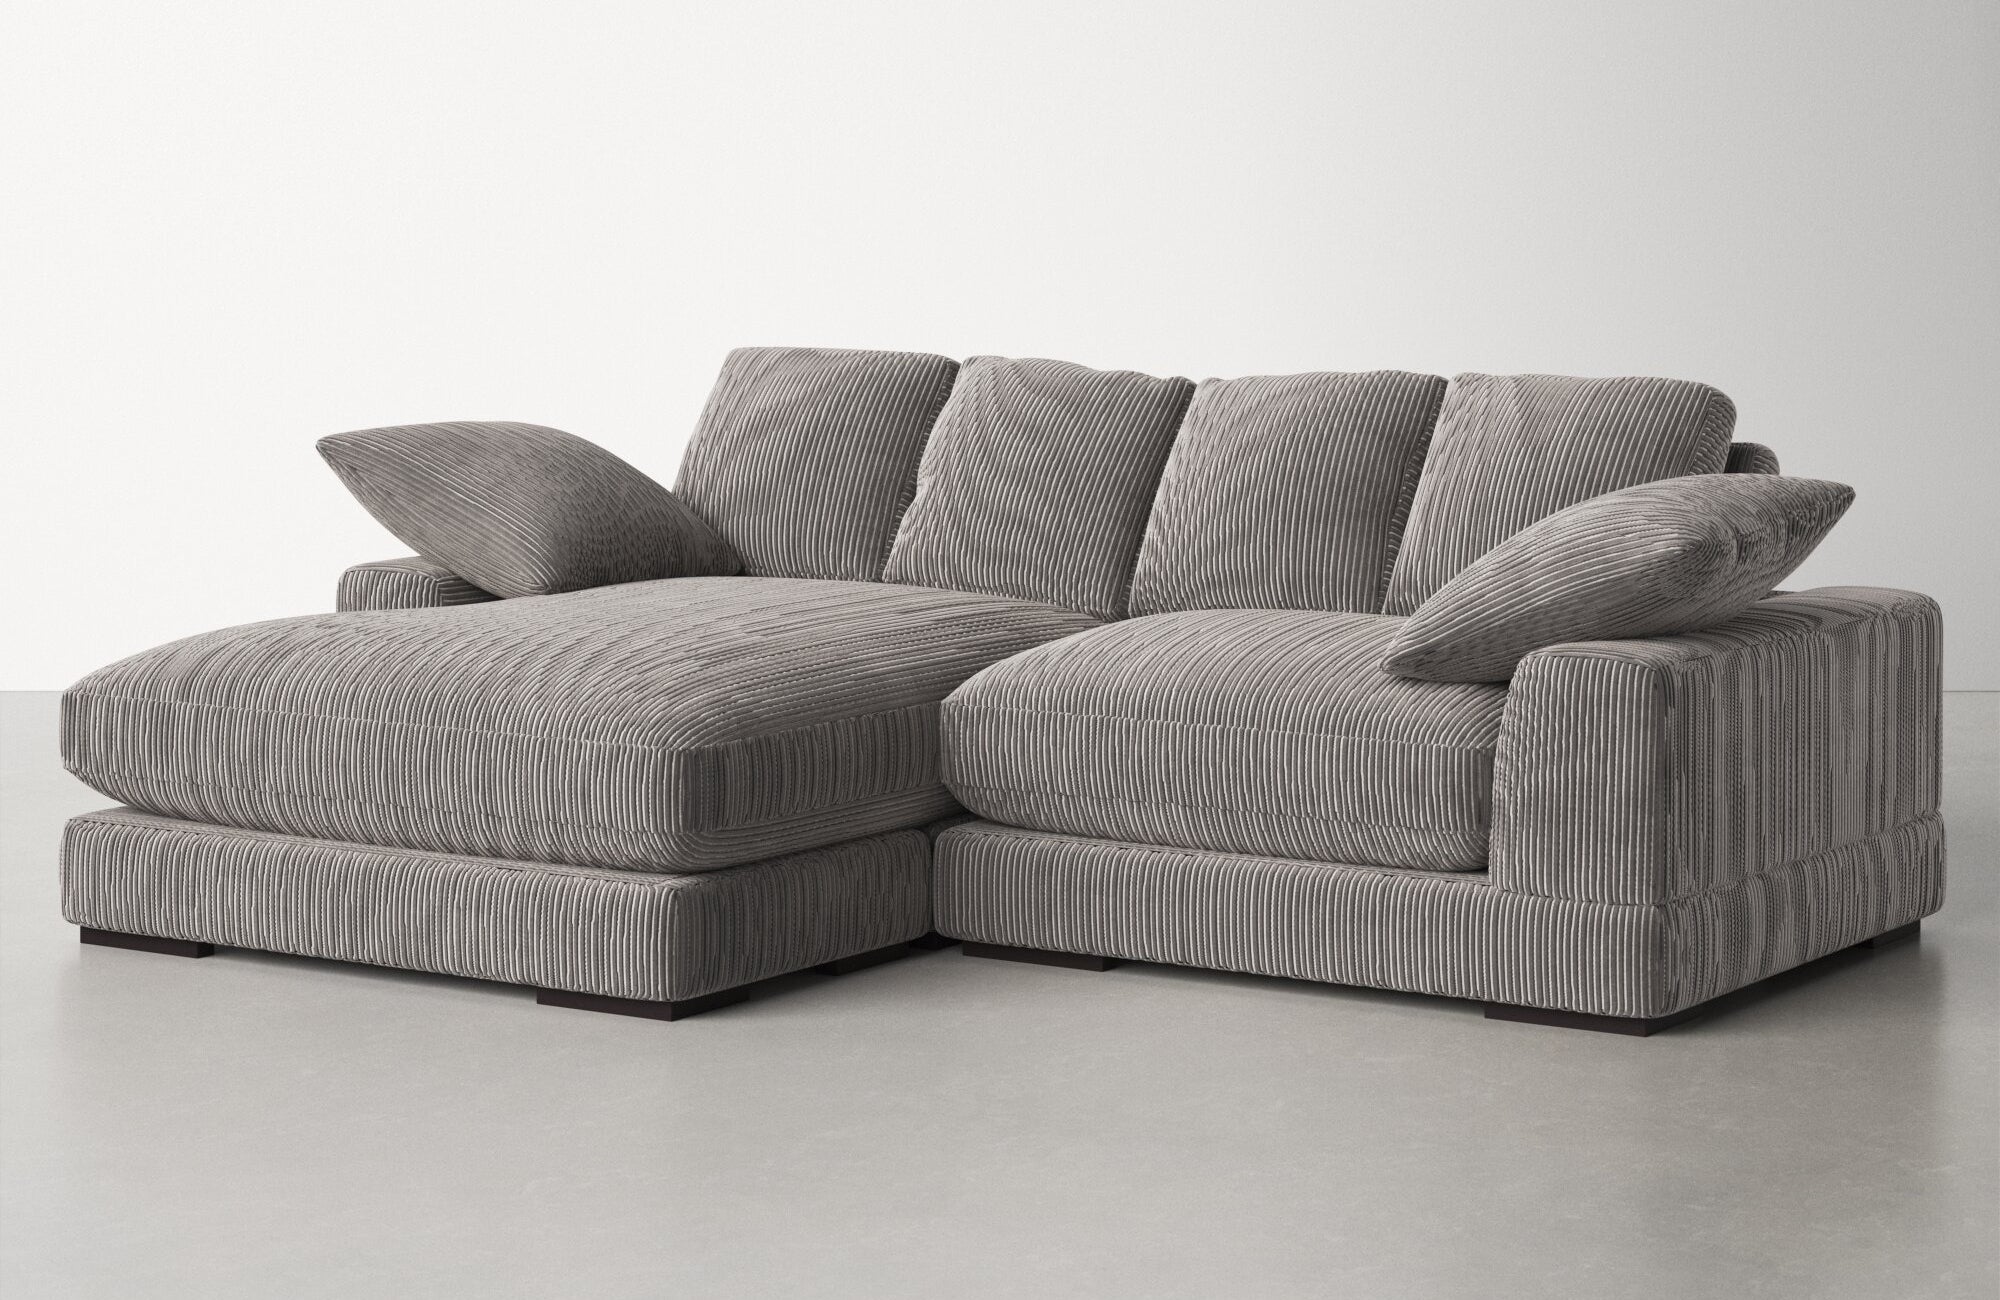 A grey Corduroy sectional